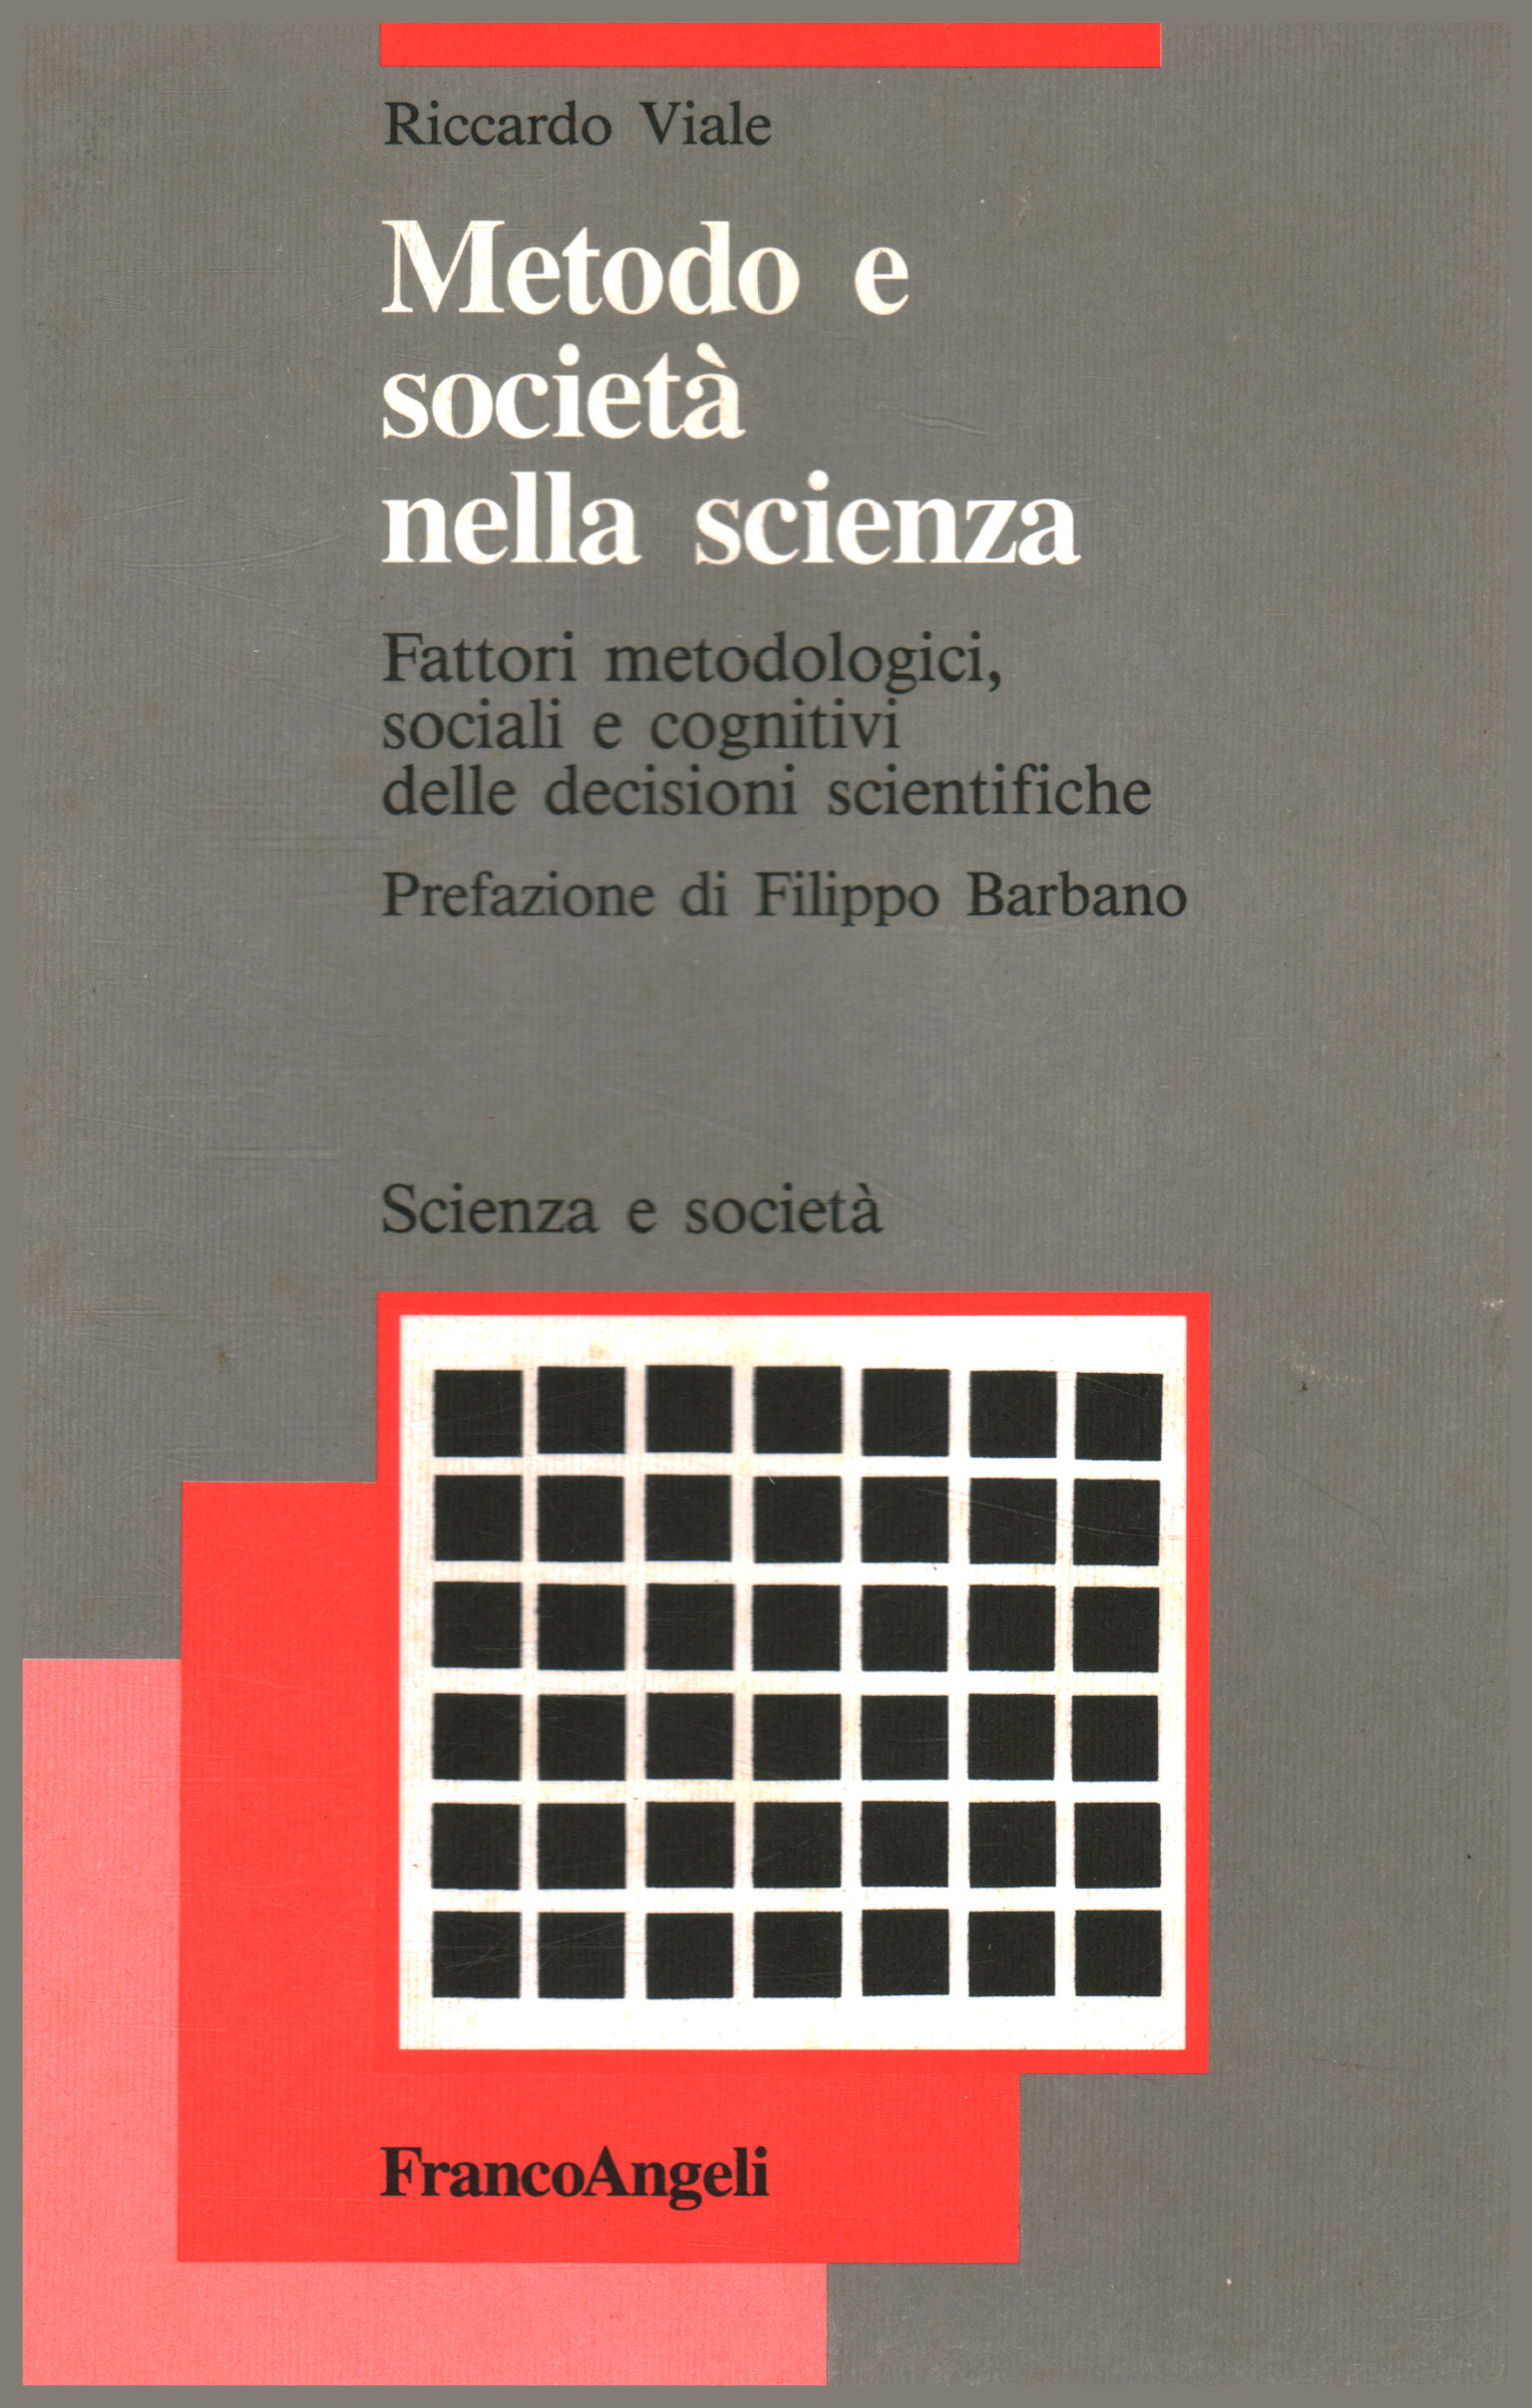 Method and society in science